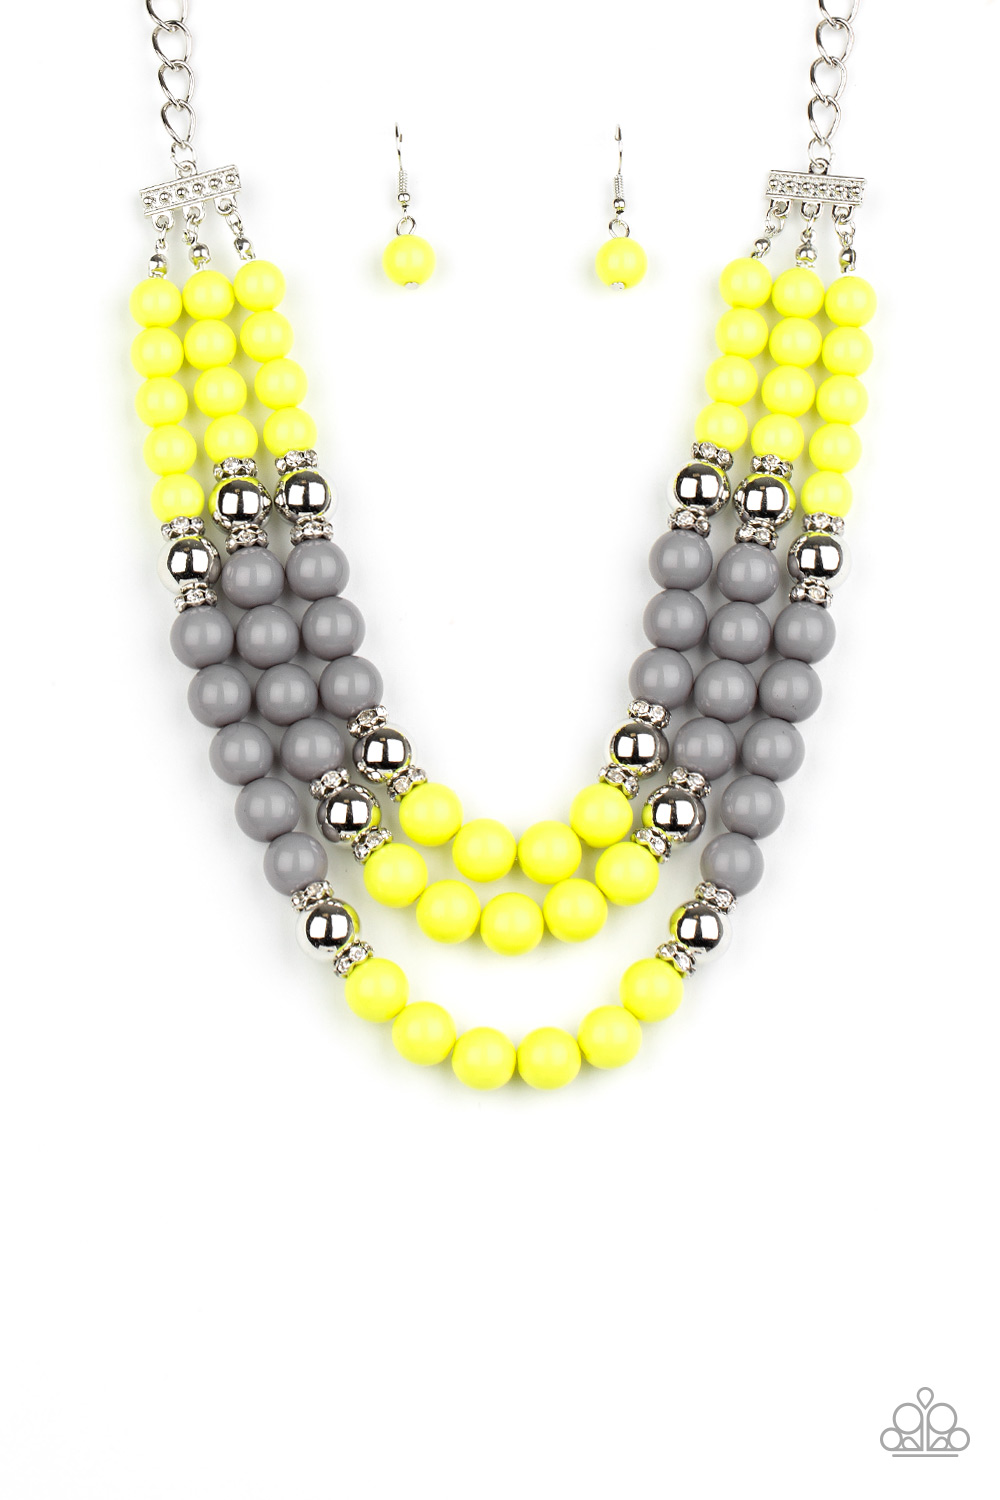 Necklace - BEAD Your Own Drum - Yellow